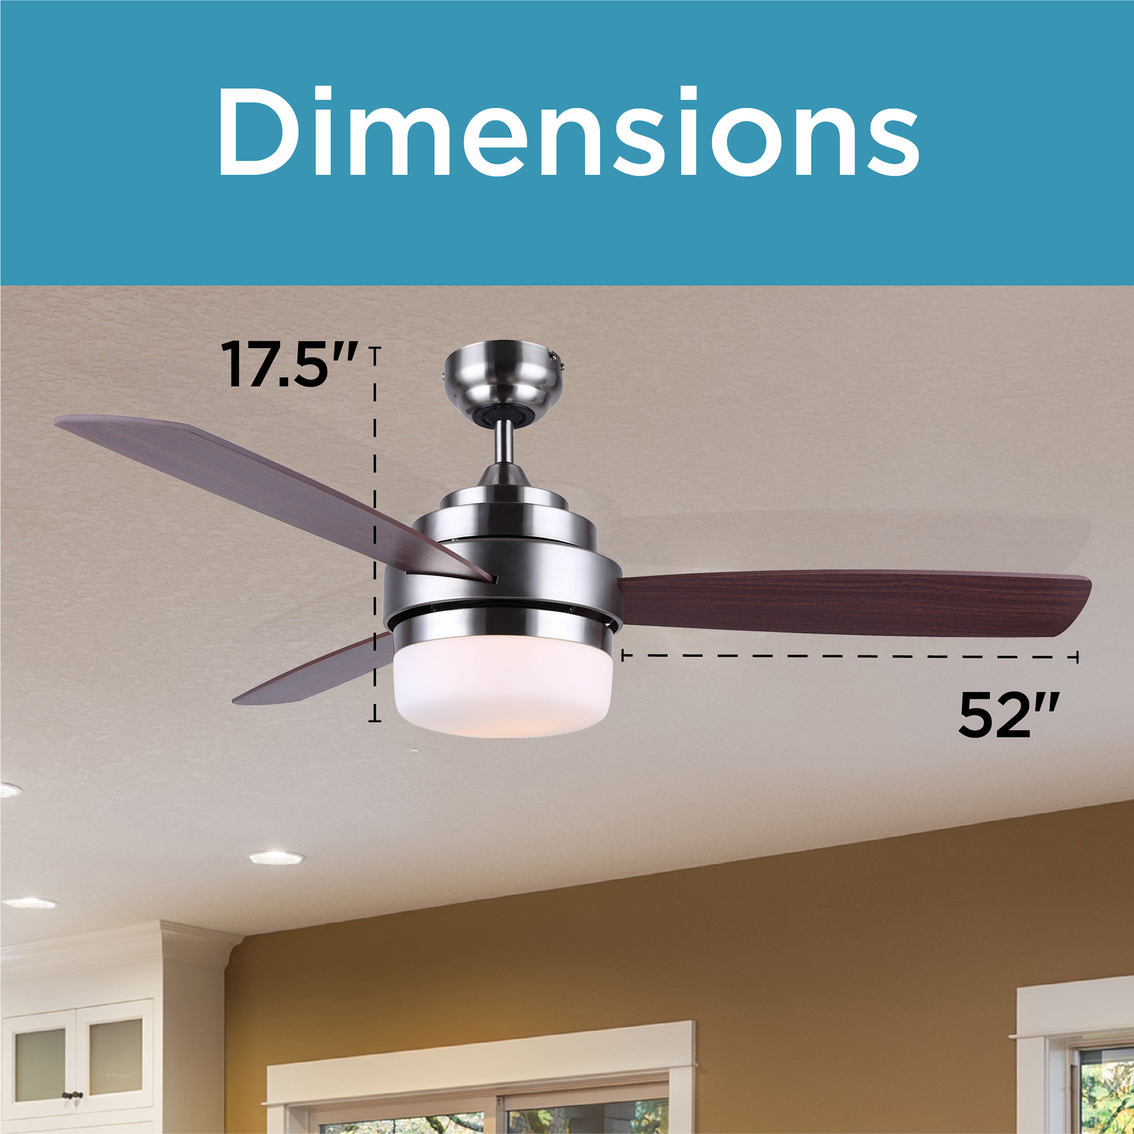 Black + Decker 52 in. Ceiling Fan with Remote Control - Image 7 of 8